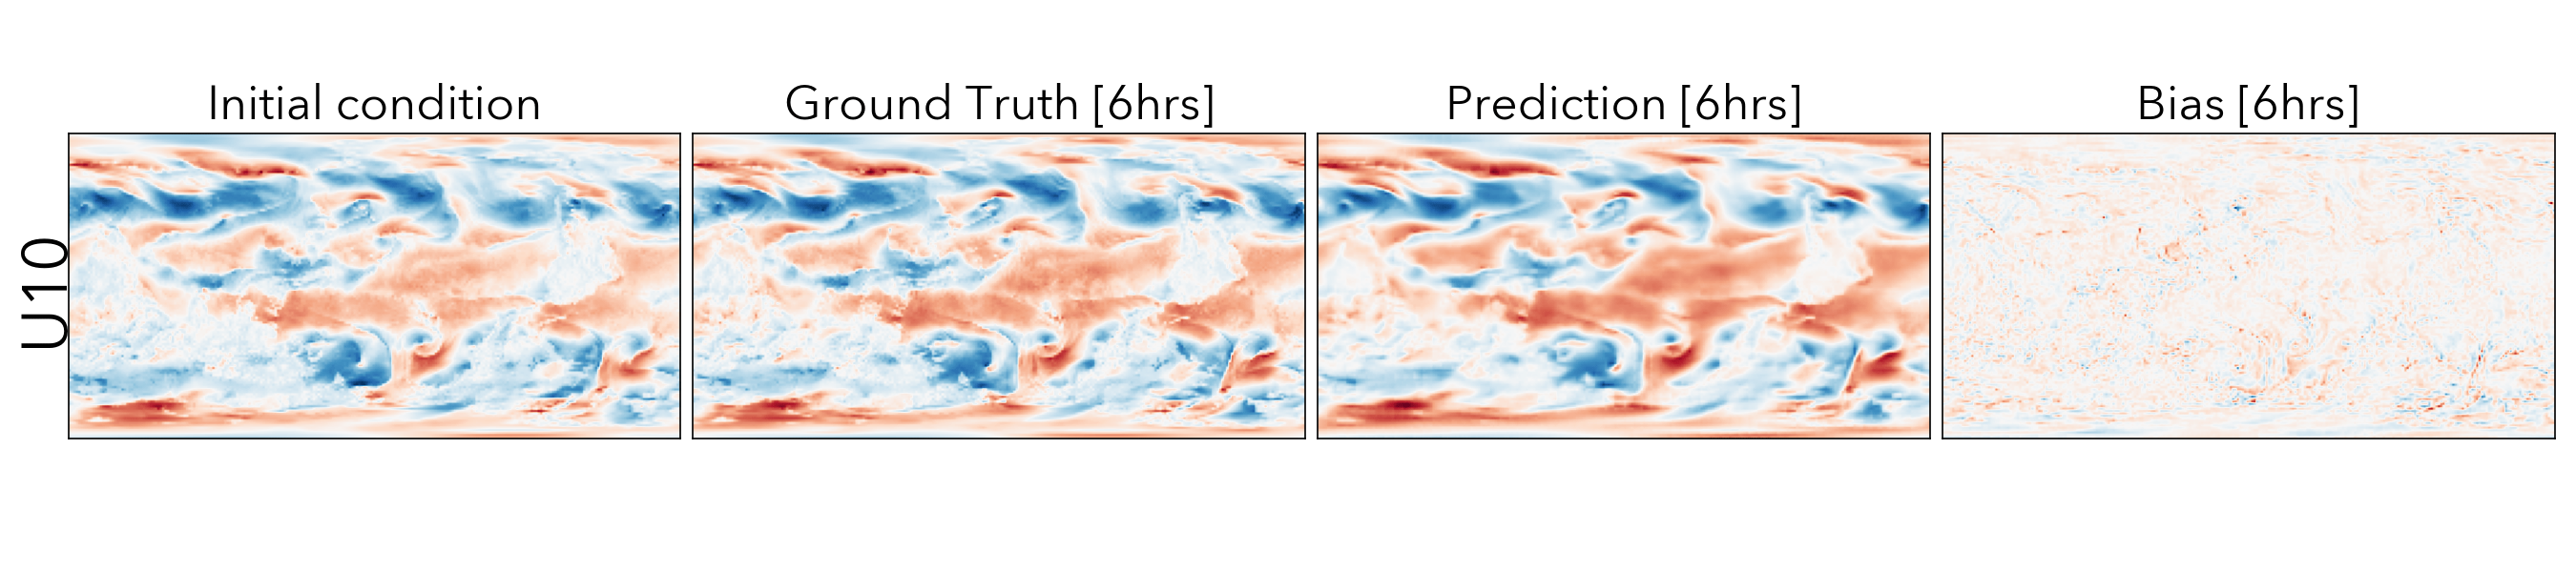 Eastward wind at 10m comparison of groundtruth vs ClimaX predictions